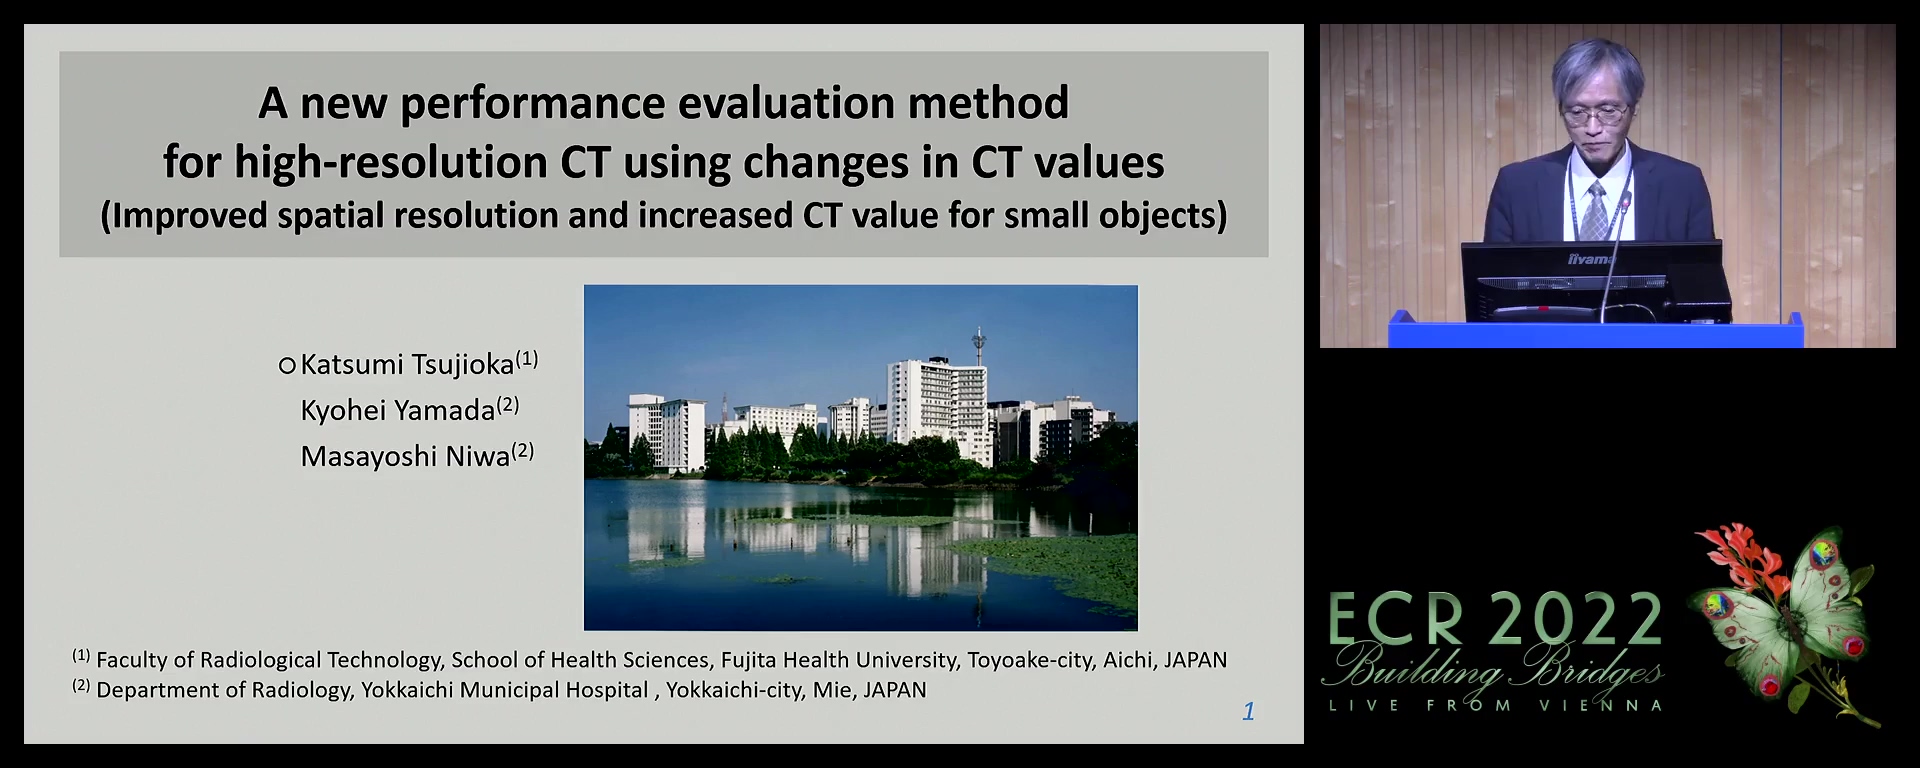 A new performance evaluation method for high-resolution CT using changes in CT values (improved spatial resolution and increased CT value for small objects) - Katsumi Tsujioka, Toyota-City  Aichi / JP